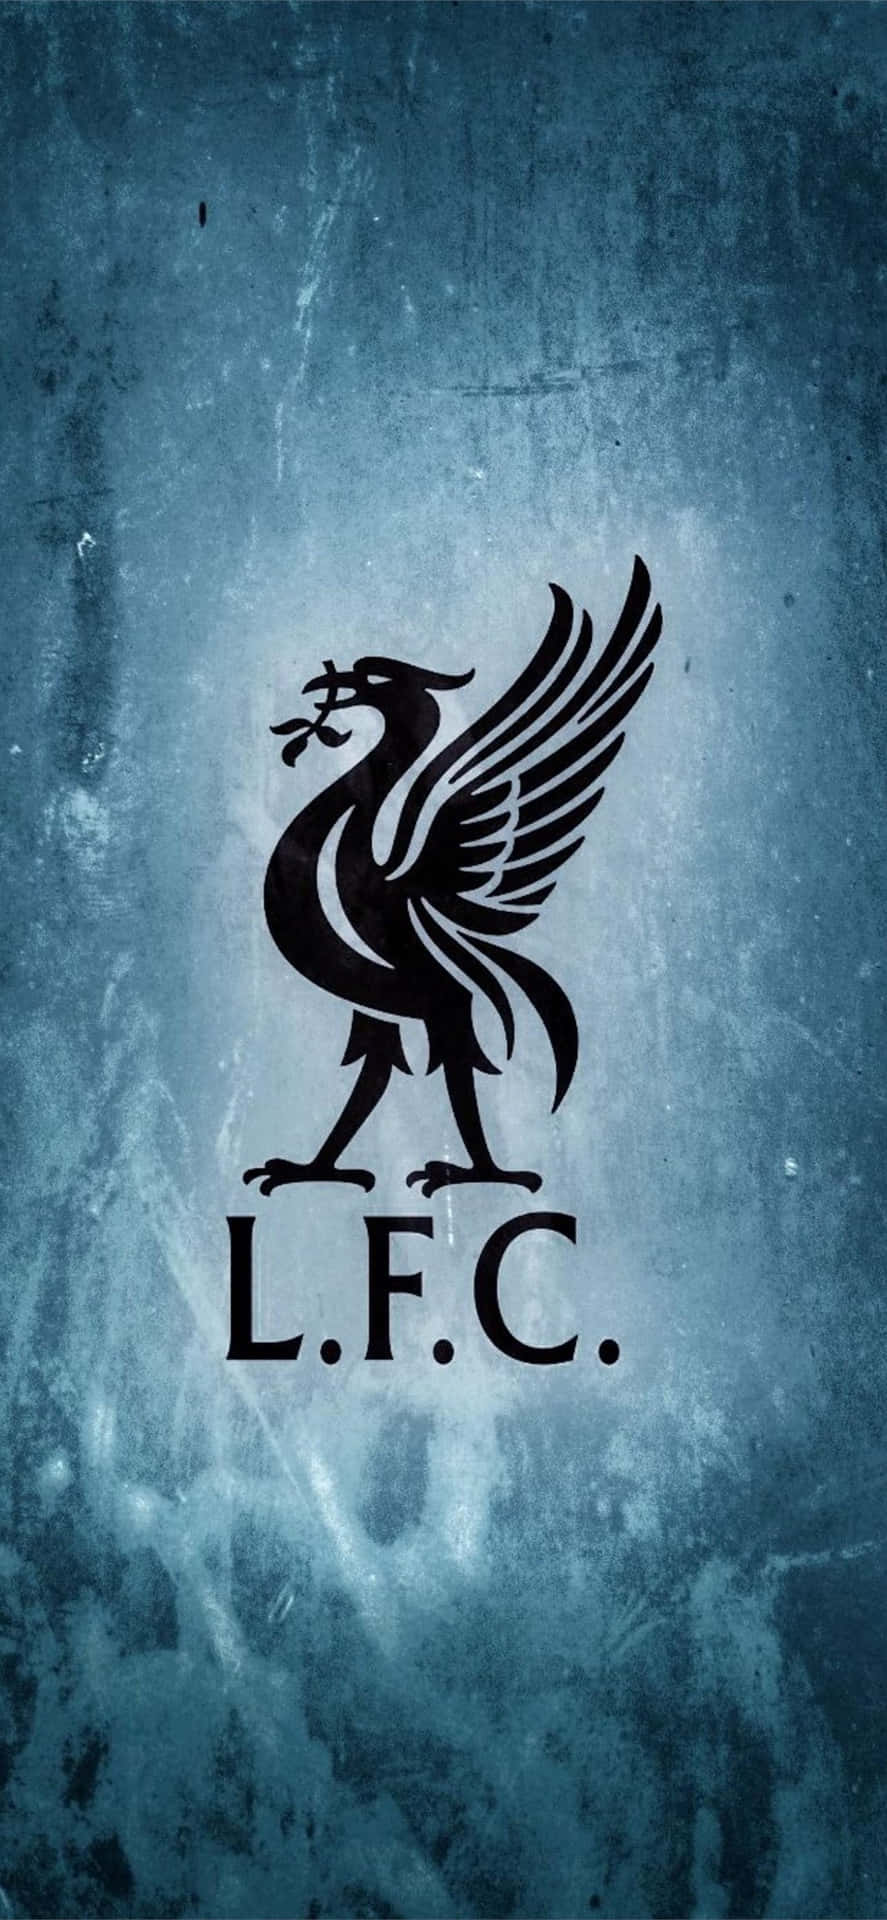 Show your team spirit with this exclusive Liverpool iPhone background Wallpaper